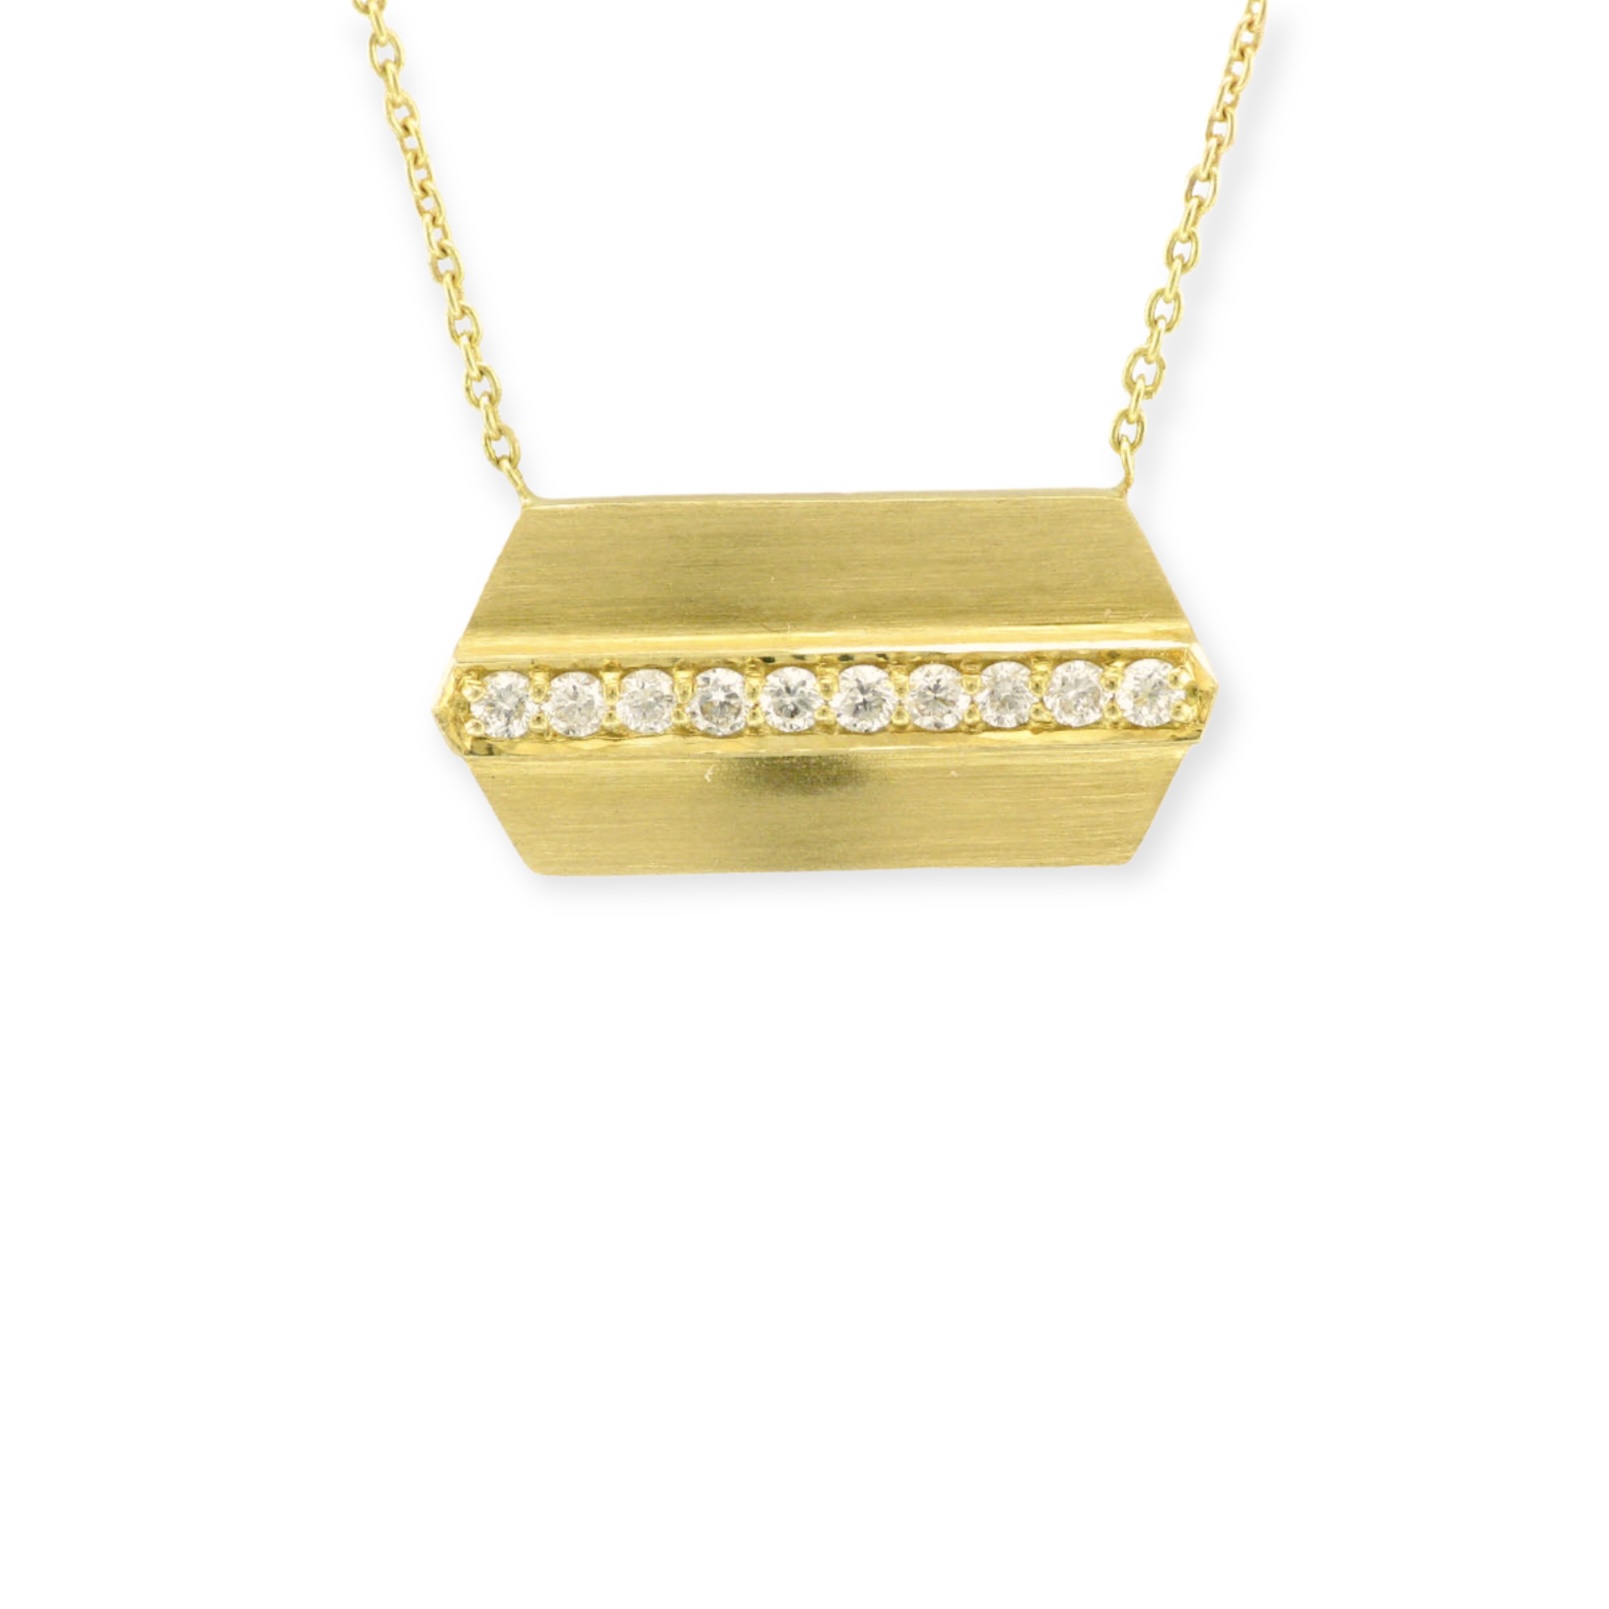 Brushed Gold Hexagon Necklace